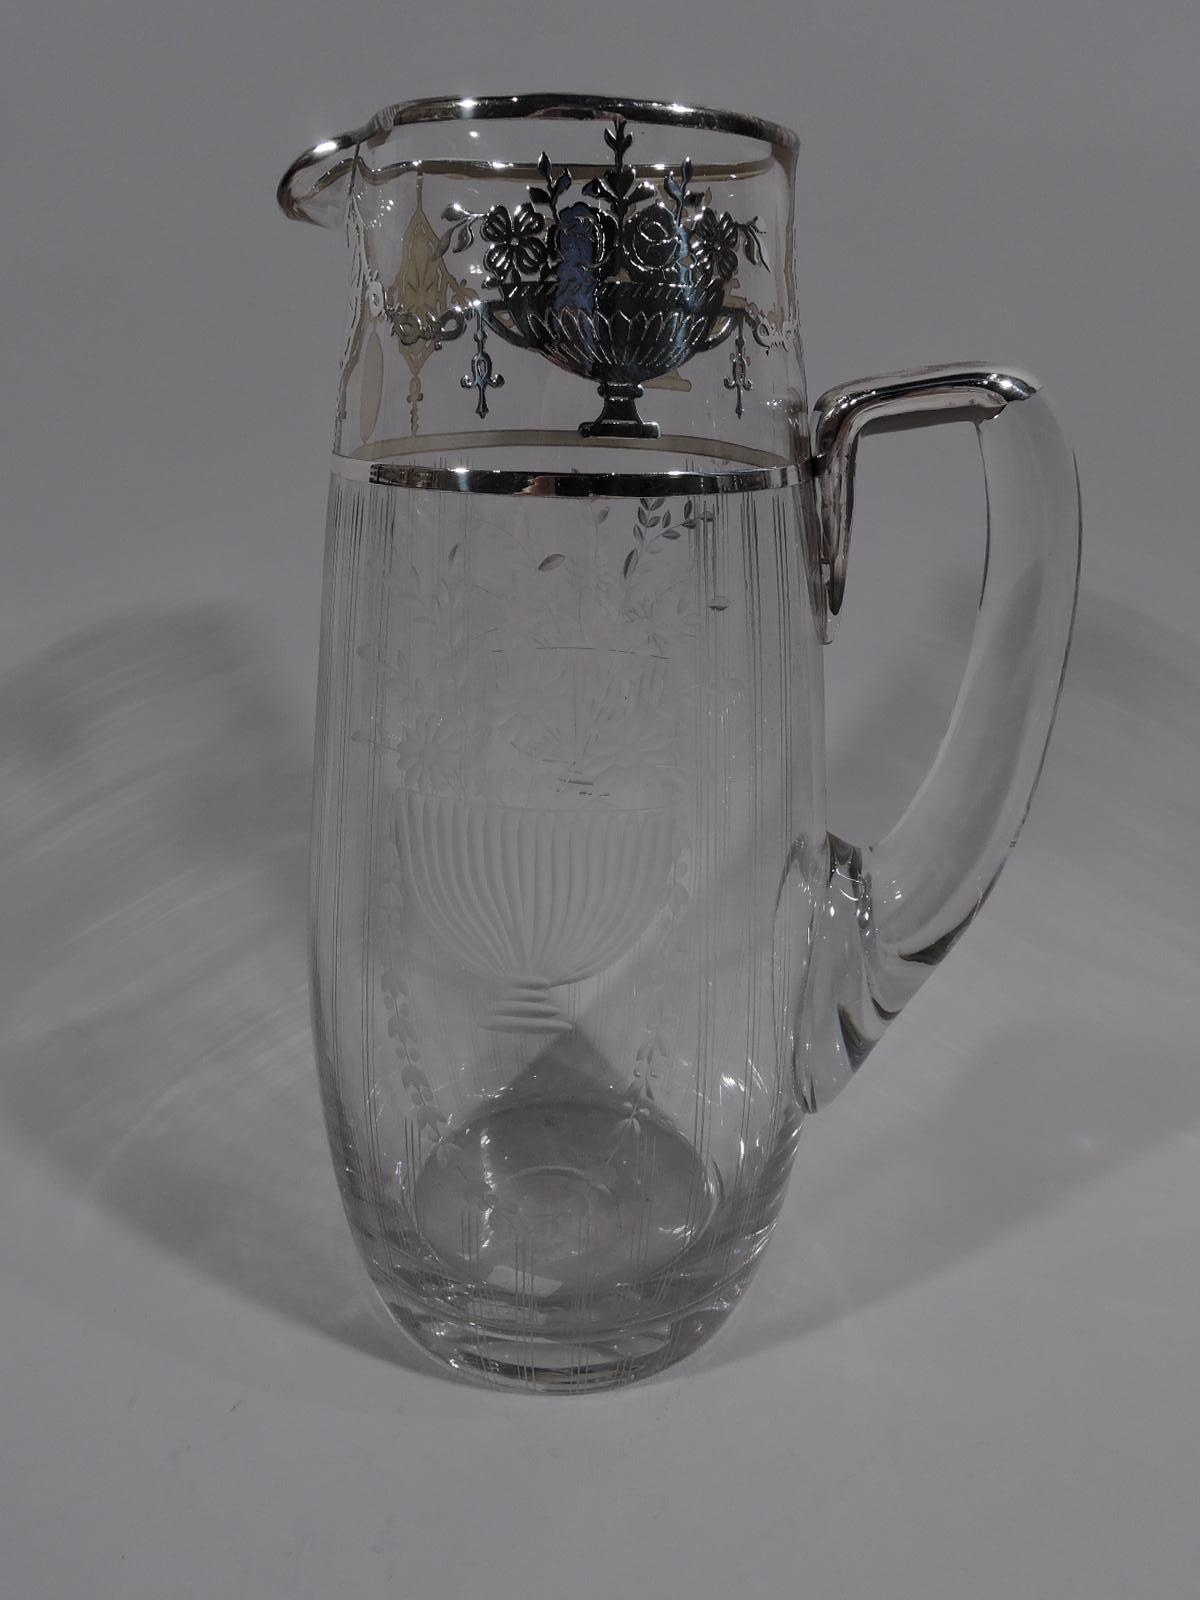 Pretty antique American Edwardian Regency Revival drink set in clear glass with silver overlay, circa 1910. This set comprises 1 pitcher and 8 glasses. Pitcher ovalish with small lip spout. Scroll bracket handle with silver CAP. Acid-etched stylized